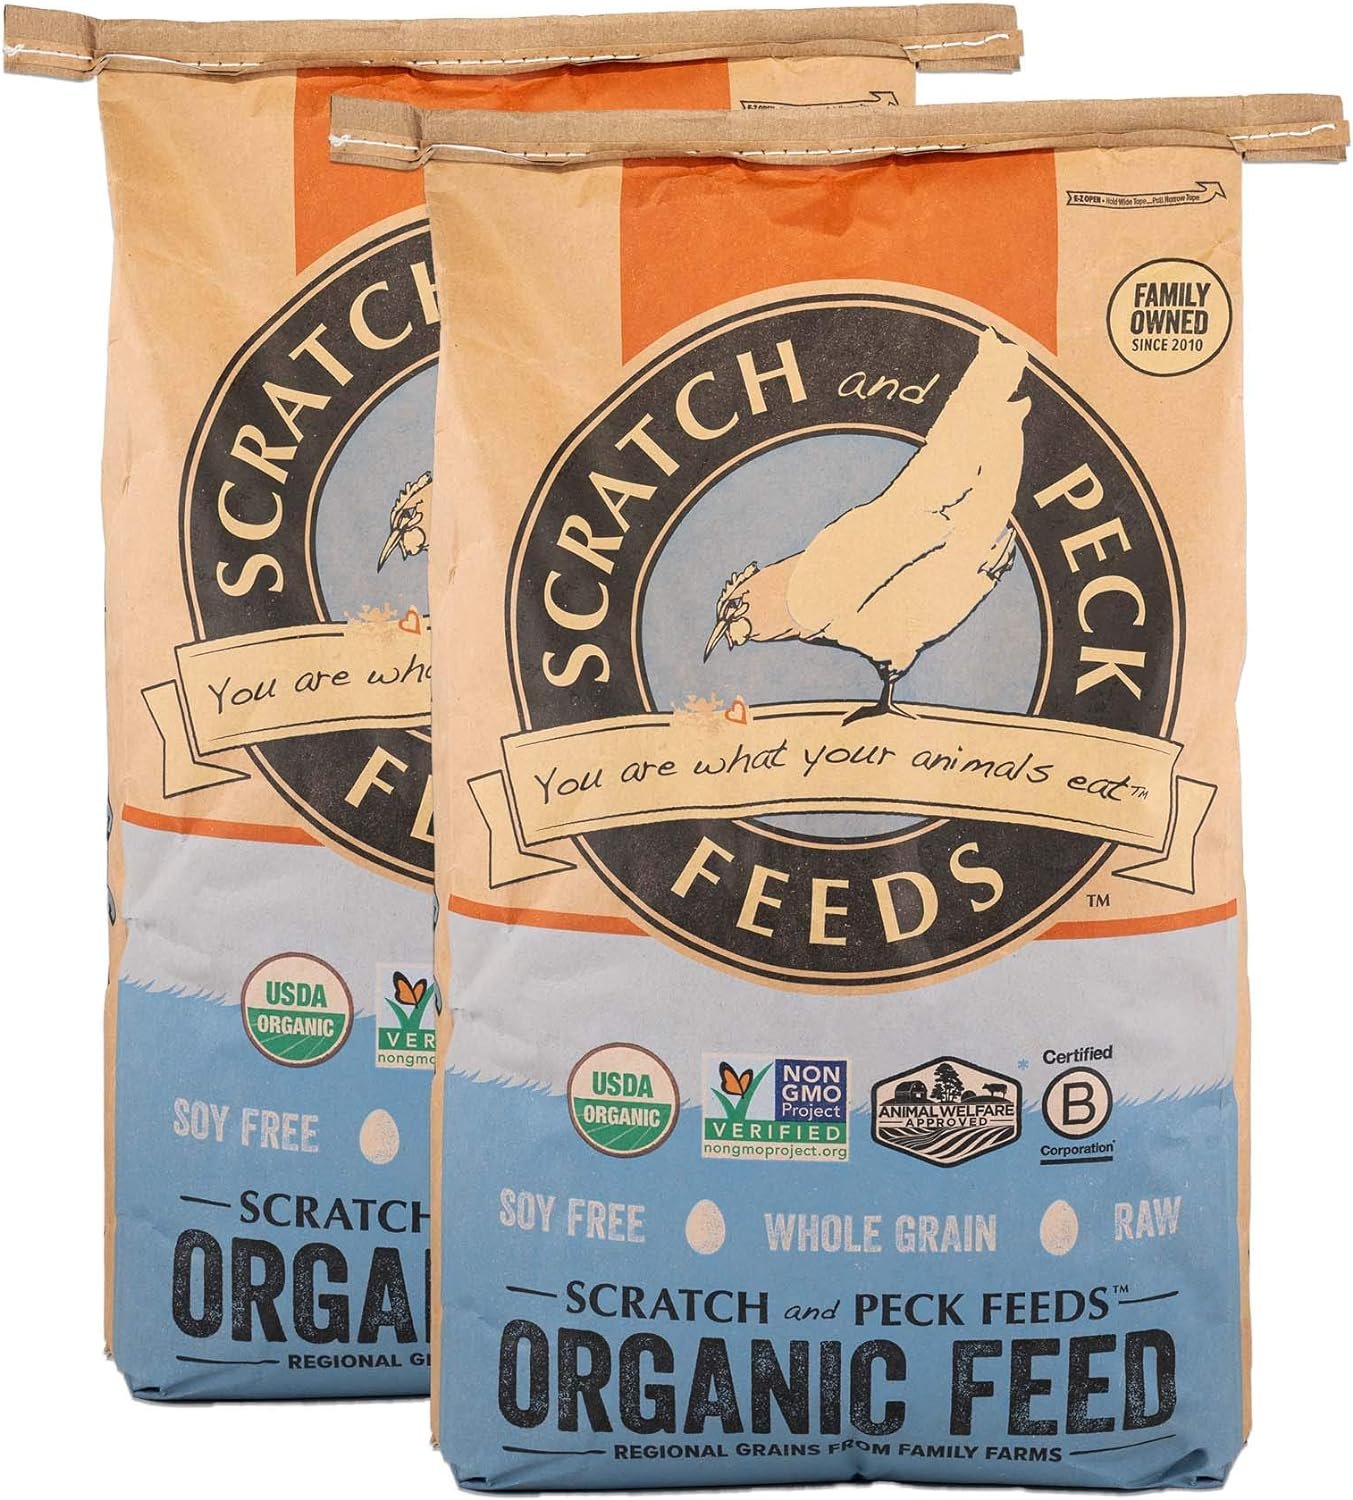 Scratch and Peck Feeds Organic 3-Grain Chicken Scratch Hen Treat - Non-GMO Project Verified, Soy Free and Corn Free Organic Chicken Feed - 50 lbs